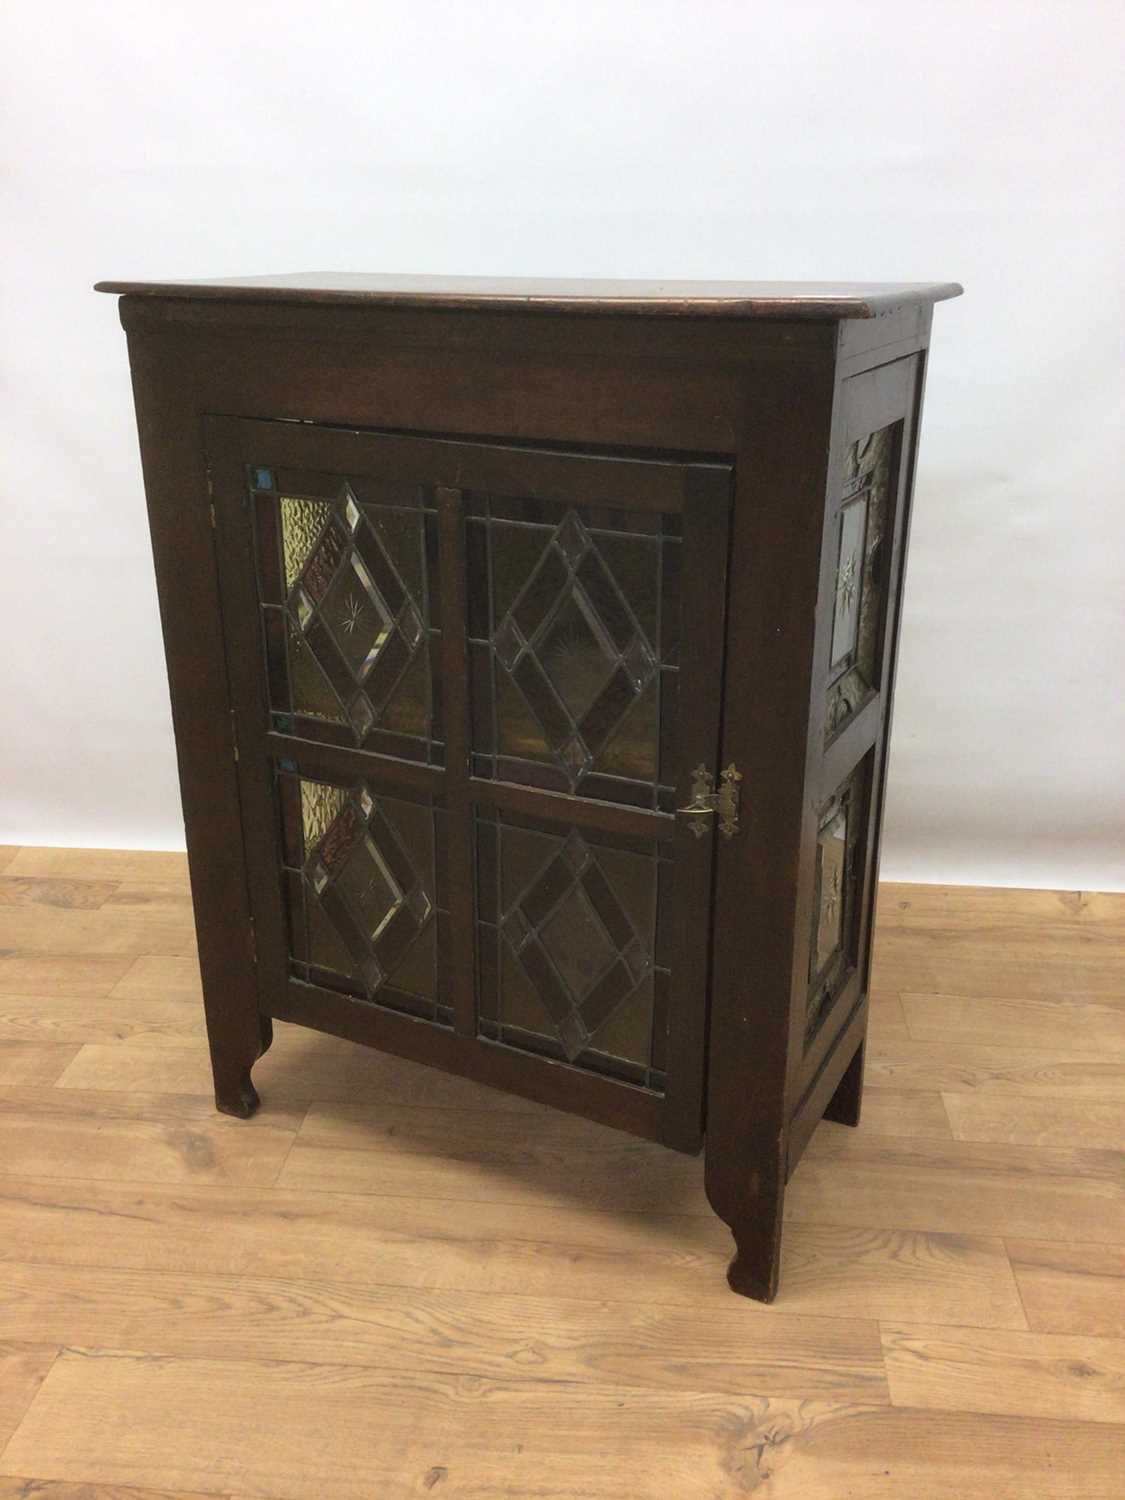 Lot 107 - Early 20th century cabinet with shelved interior enclosed by stained and leaded glazed door, 68cm wide, 32cm deep, 86cm high